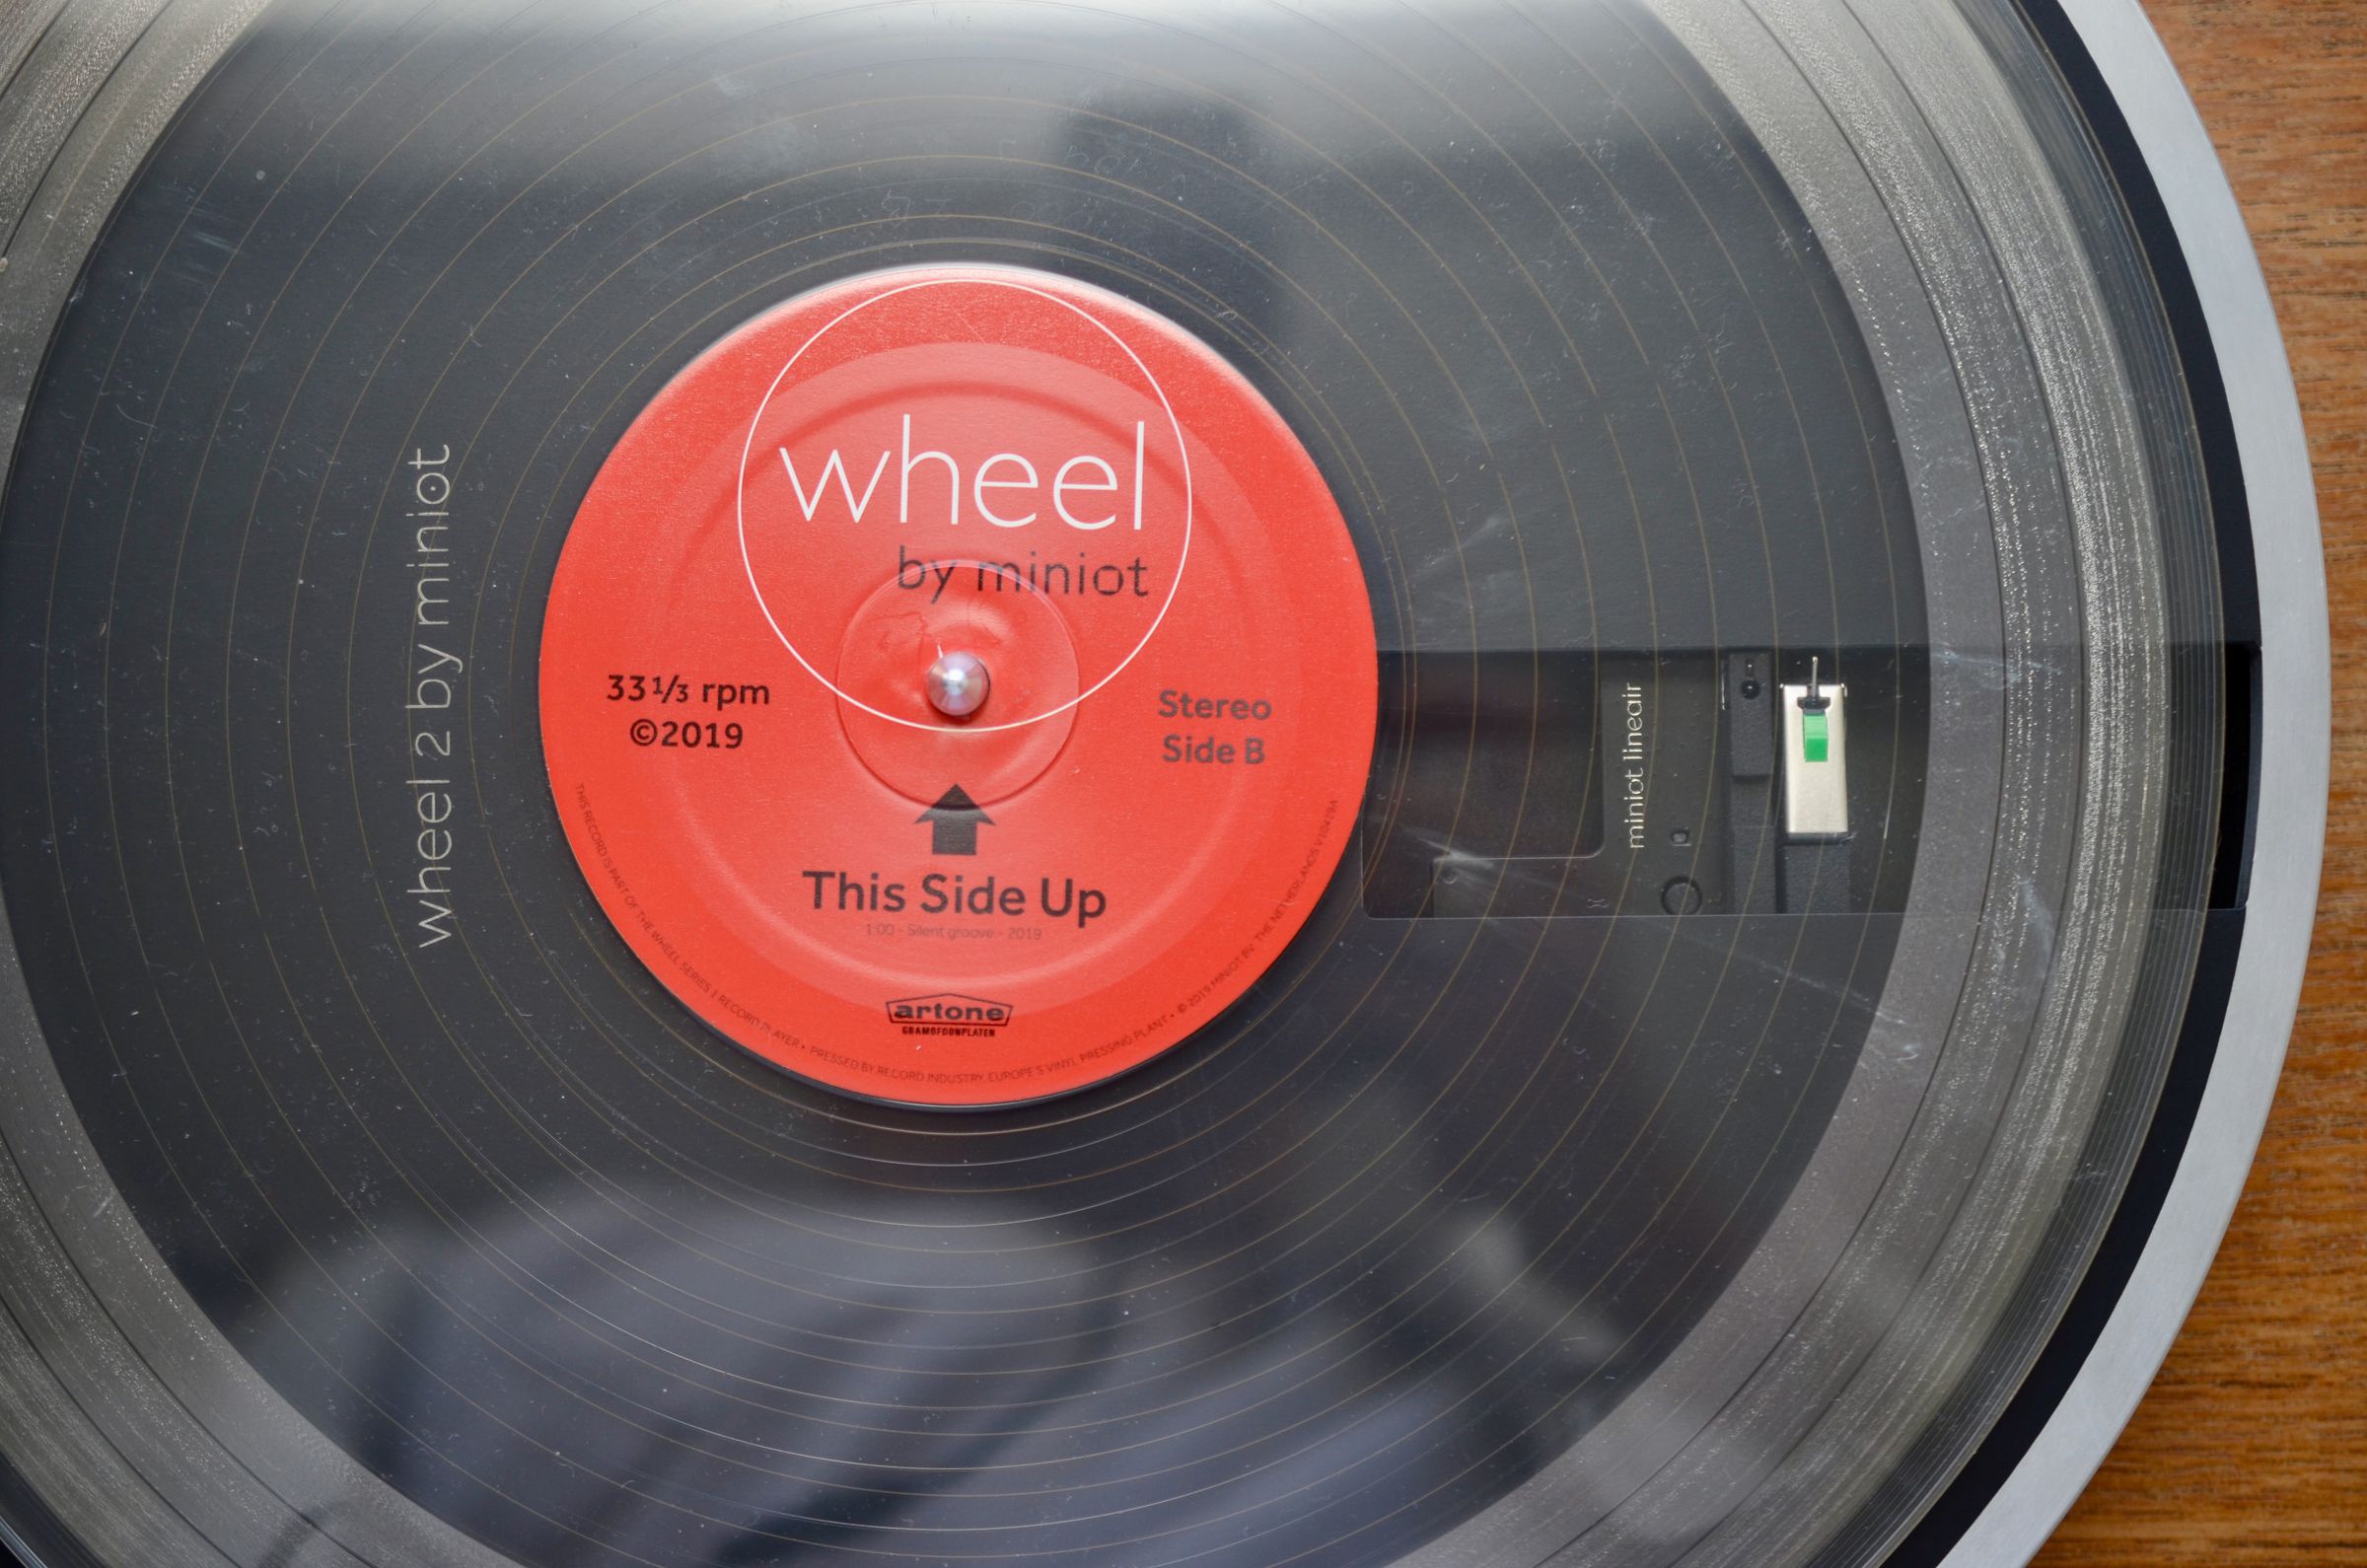 Here, you can see the tonearm beneath the transparent record supplied with every Wheel 2 turntable.